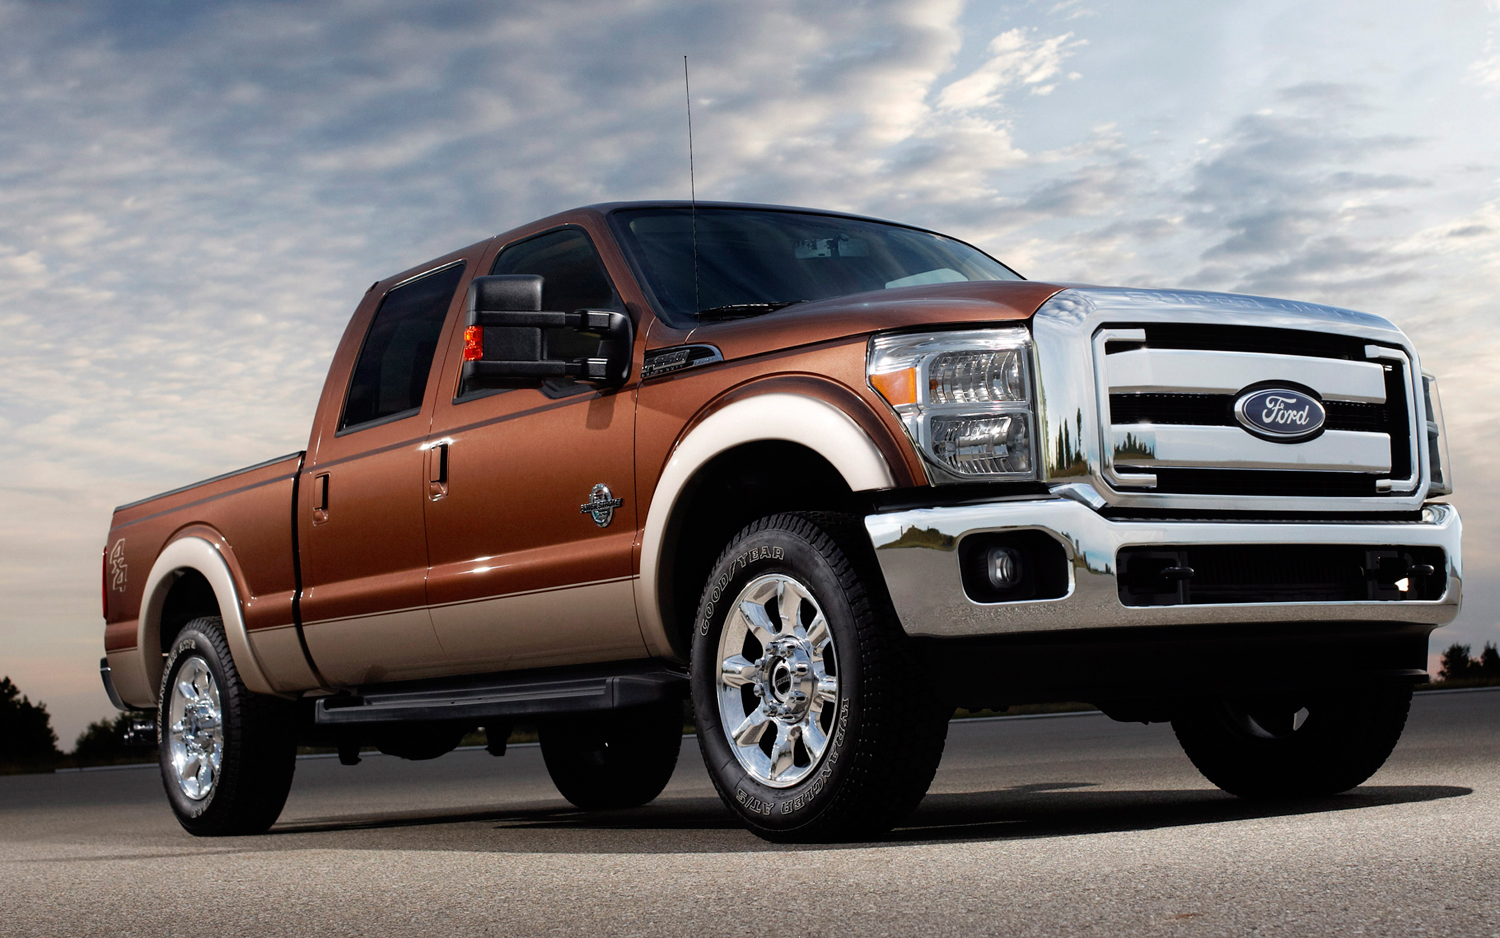 HQ Ford F-250 Wallpapers | File 906.29Kb